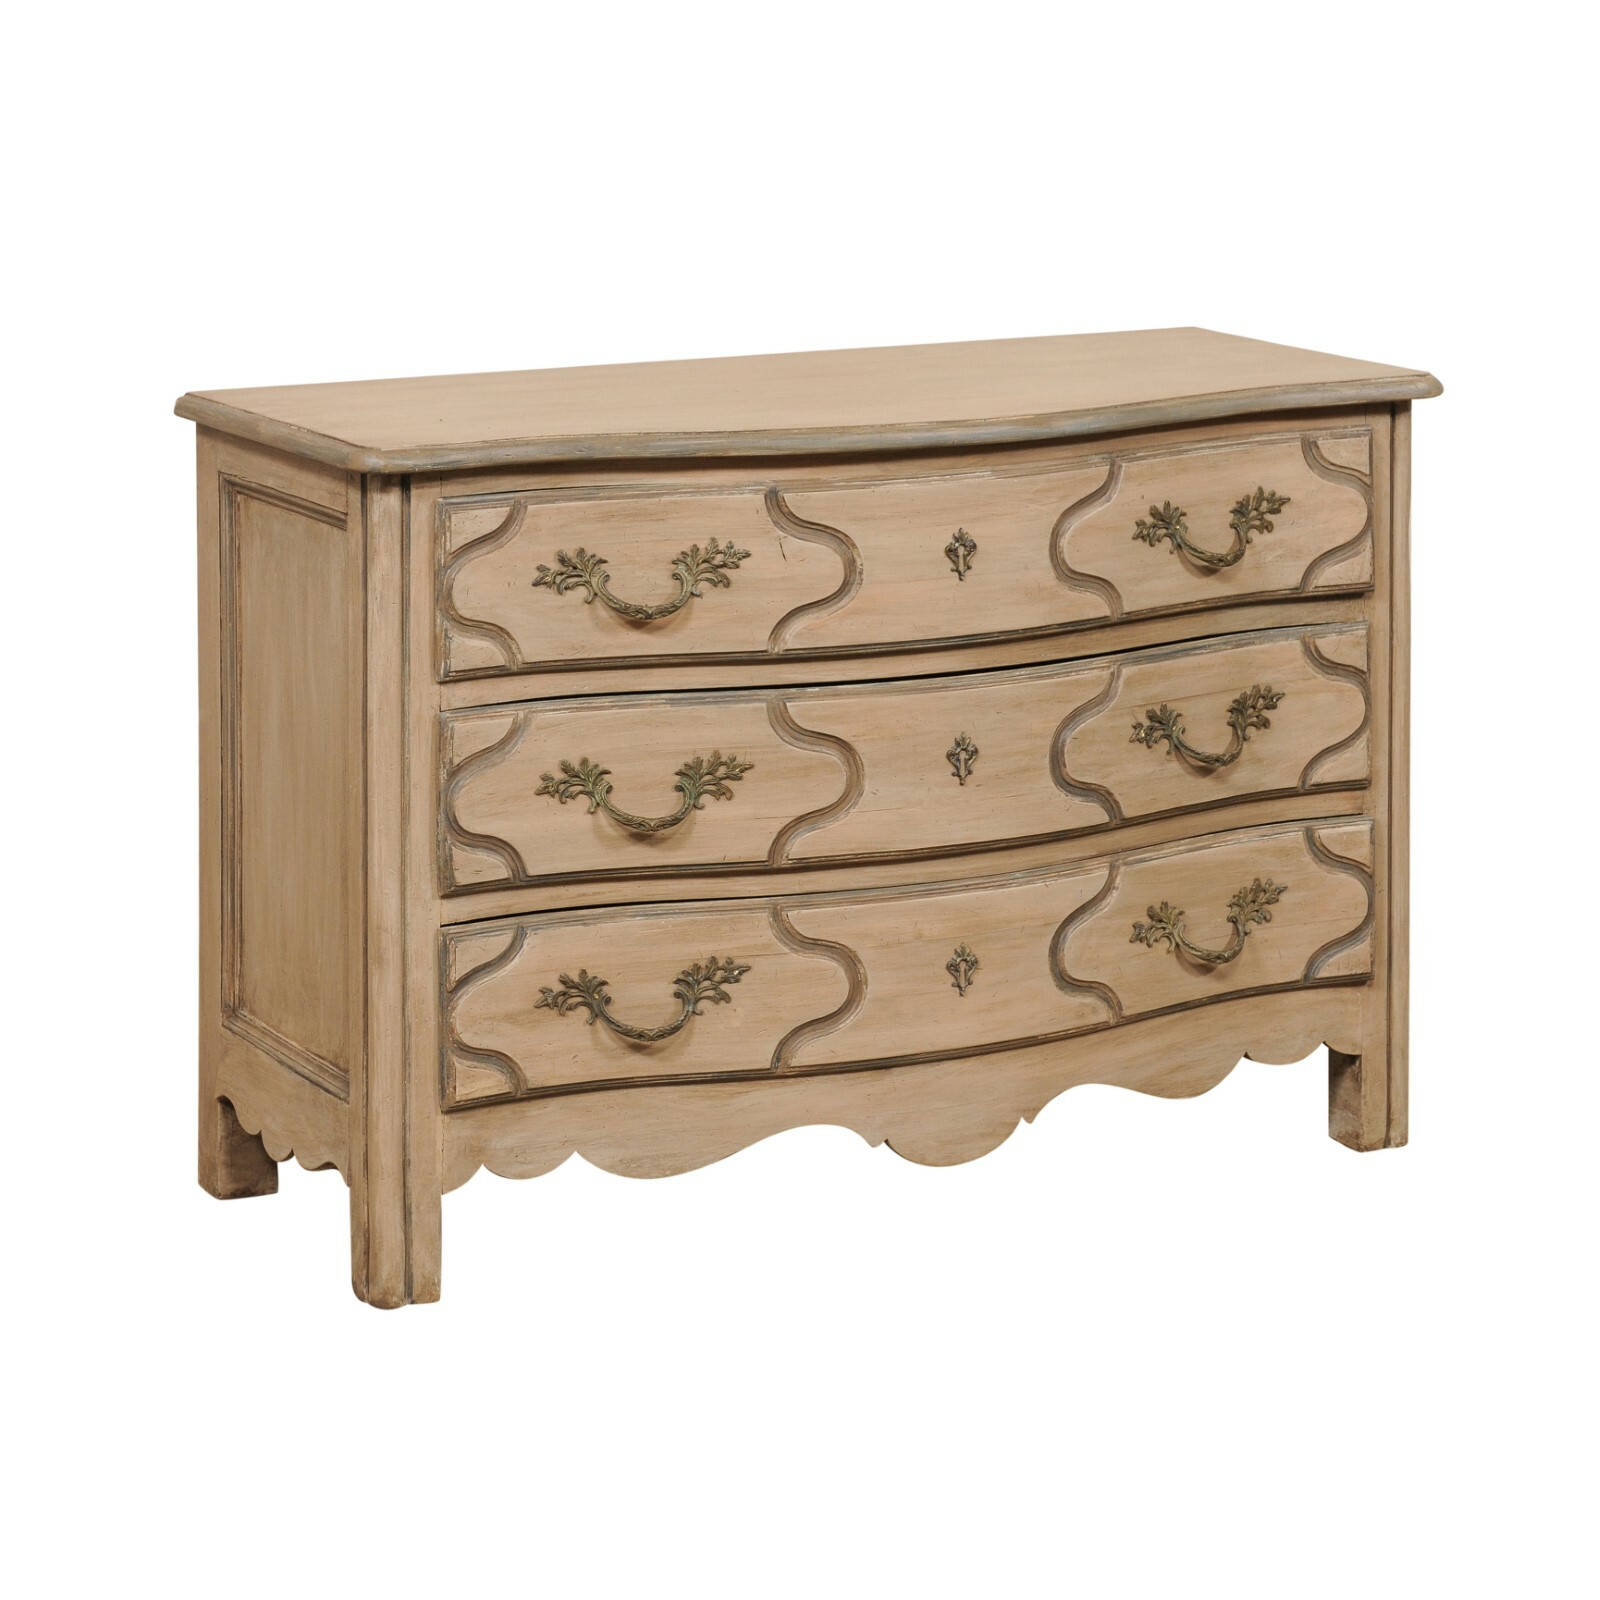 Italian Painted Serpentine Chest of Drawers